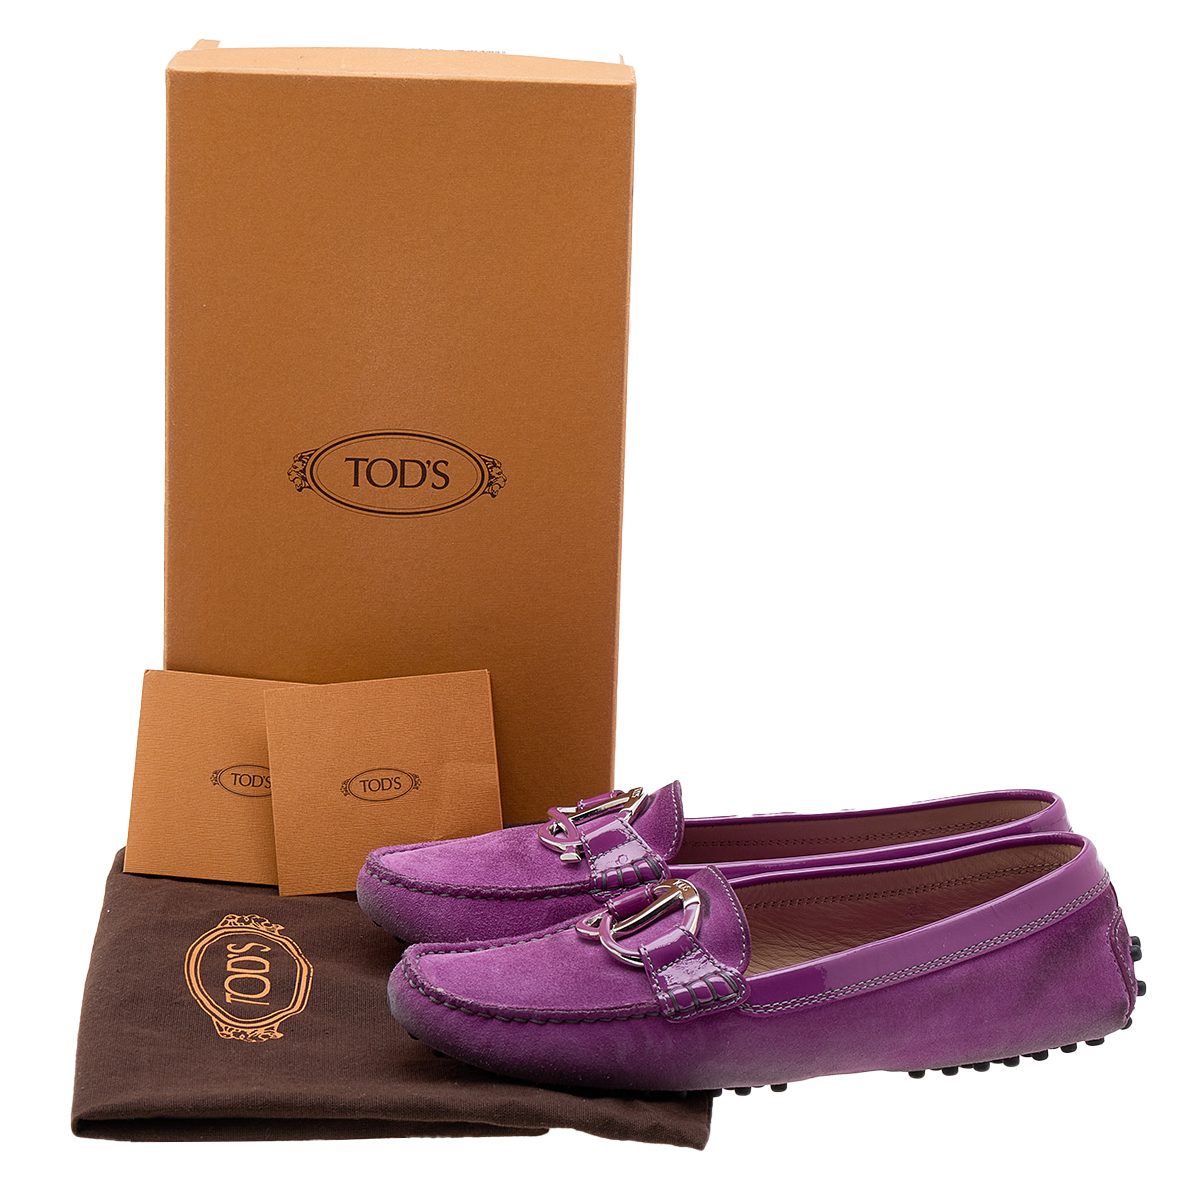 Tod's Purple Suede And Patent Leather Trim Embellished Slip On Loafers Size 38